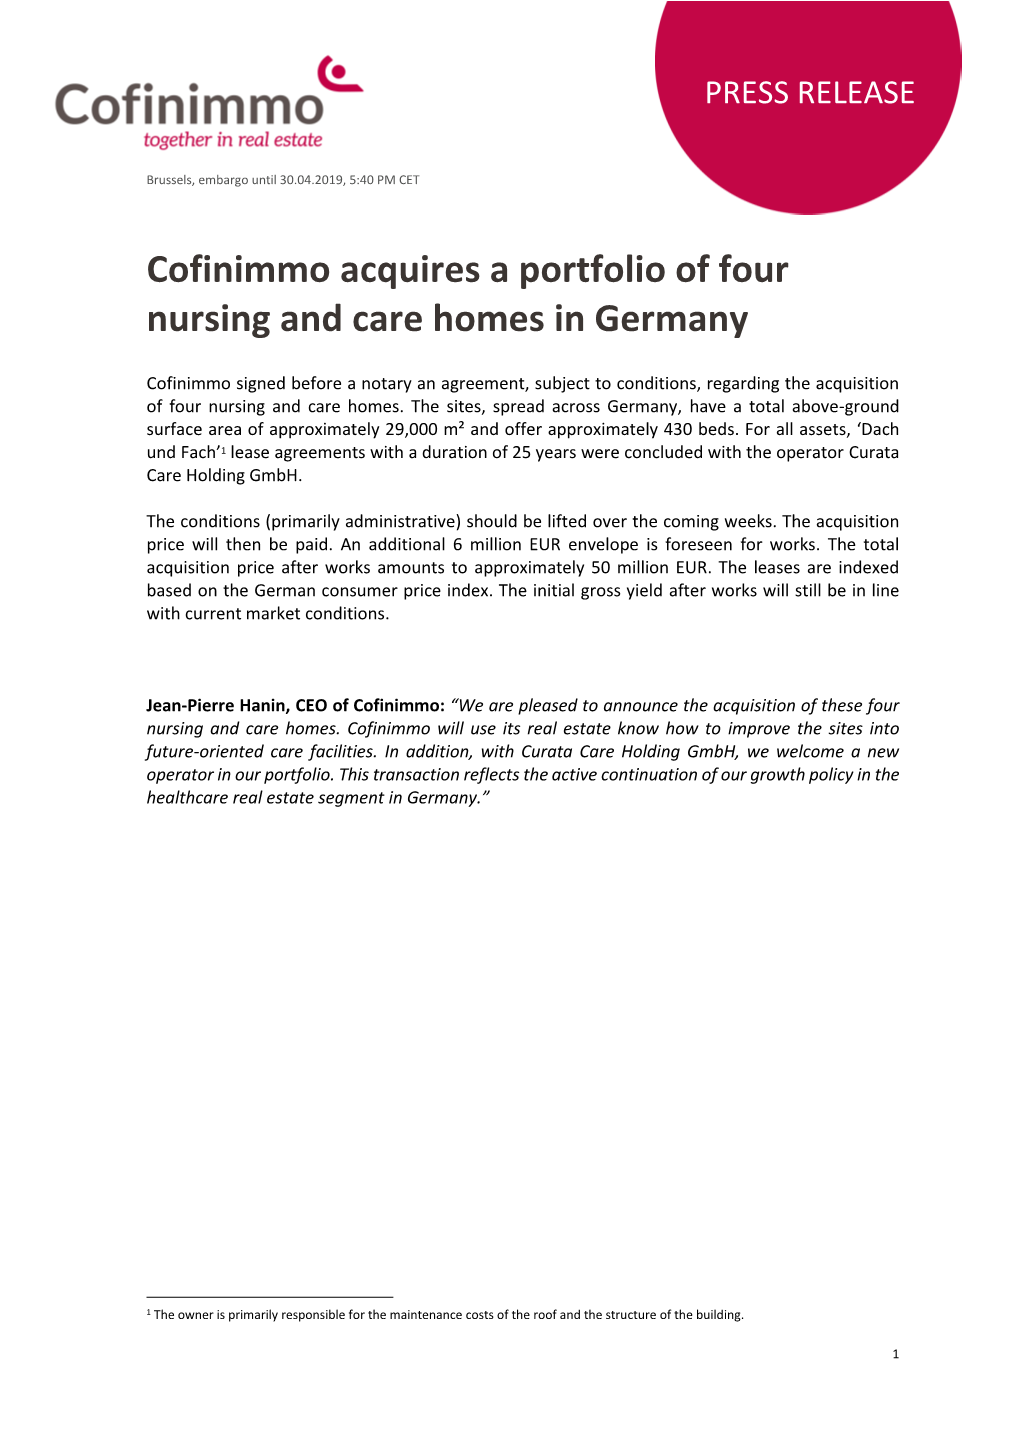 Cofinimmo Acquires a Portfolio of Four Nursing and Care Homes in Germany